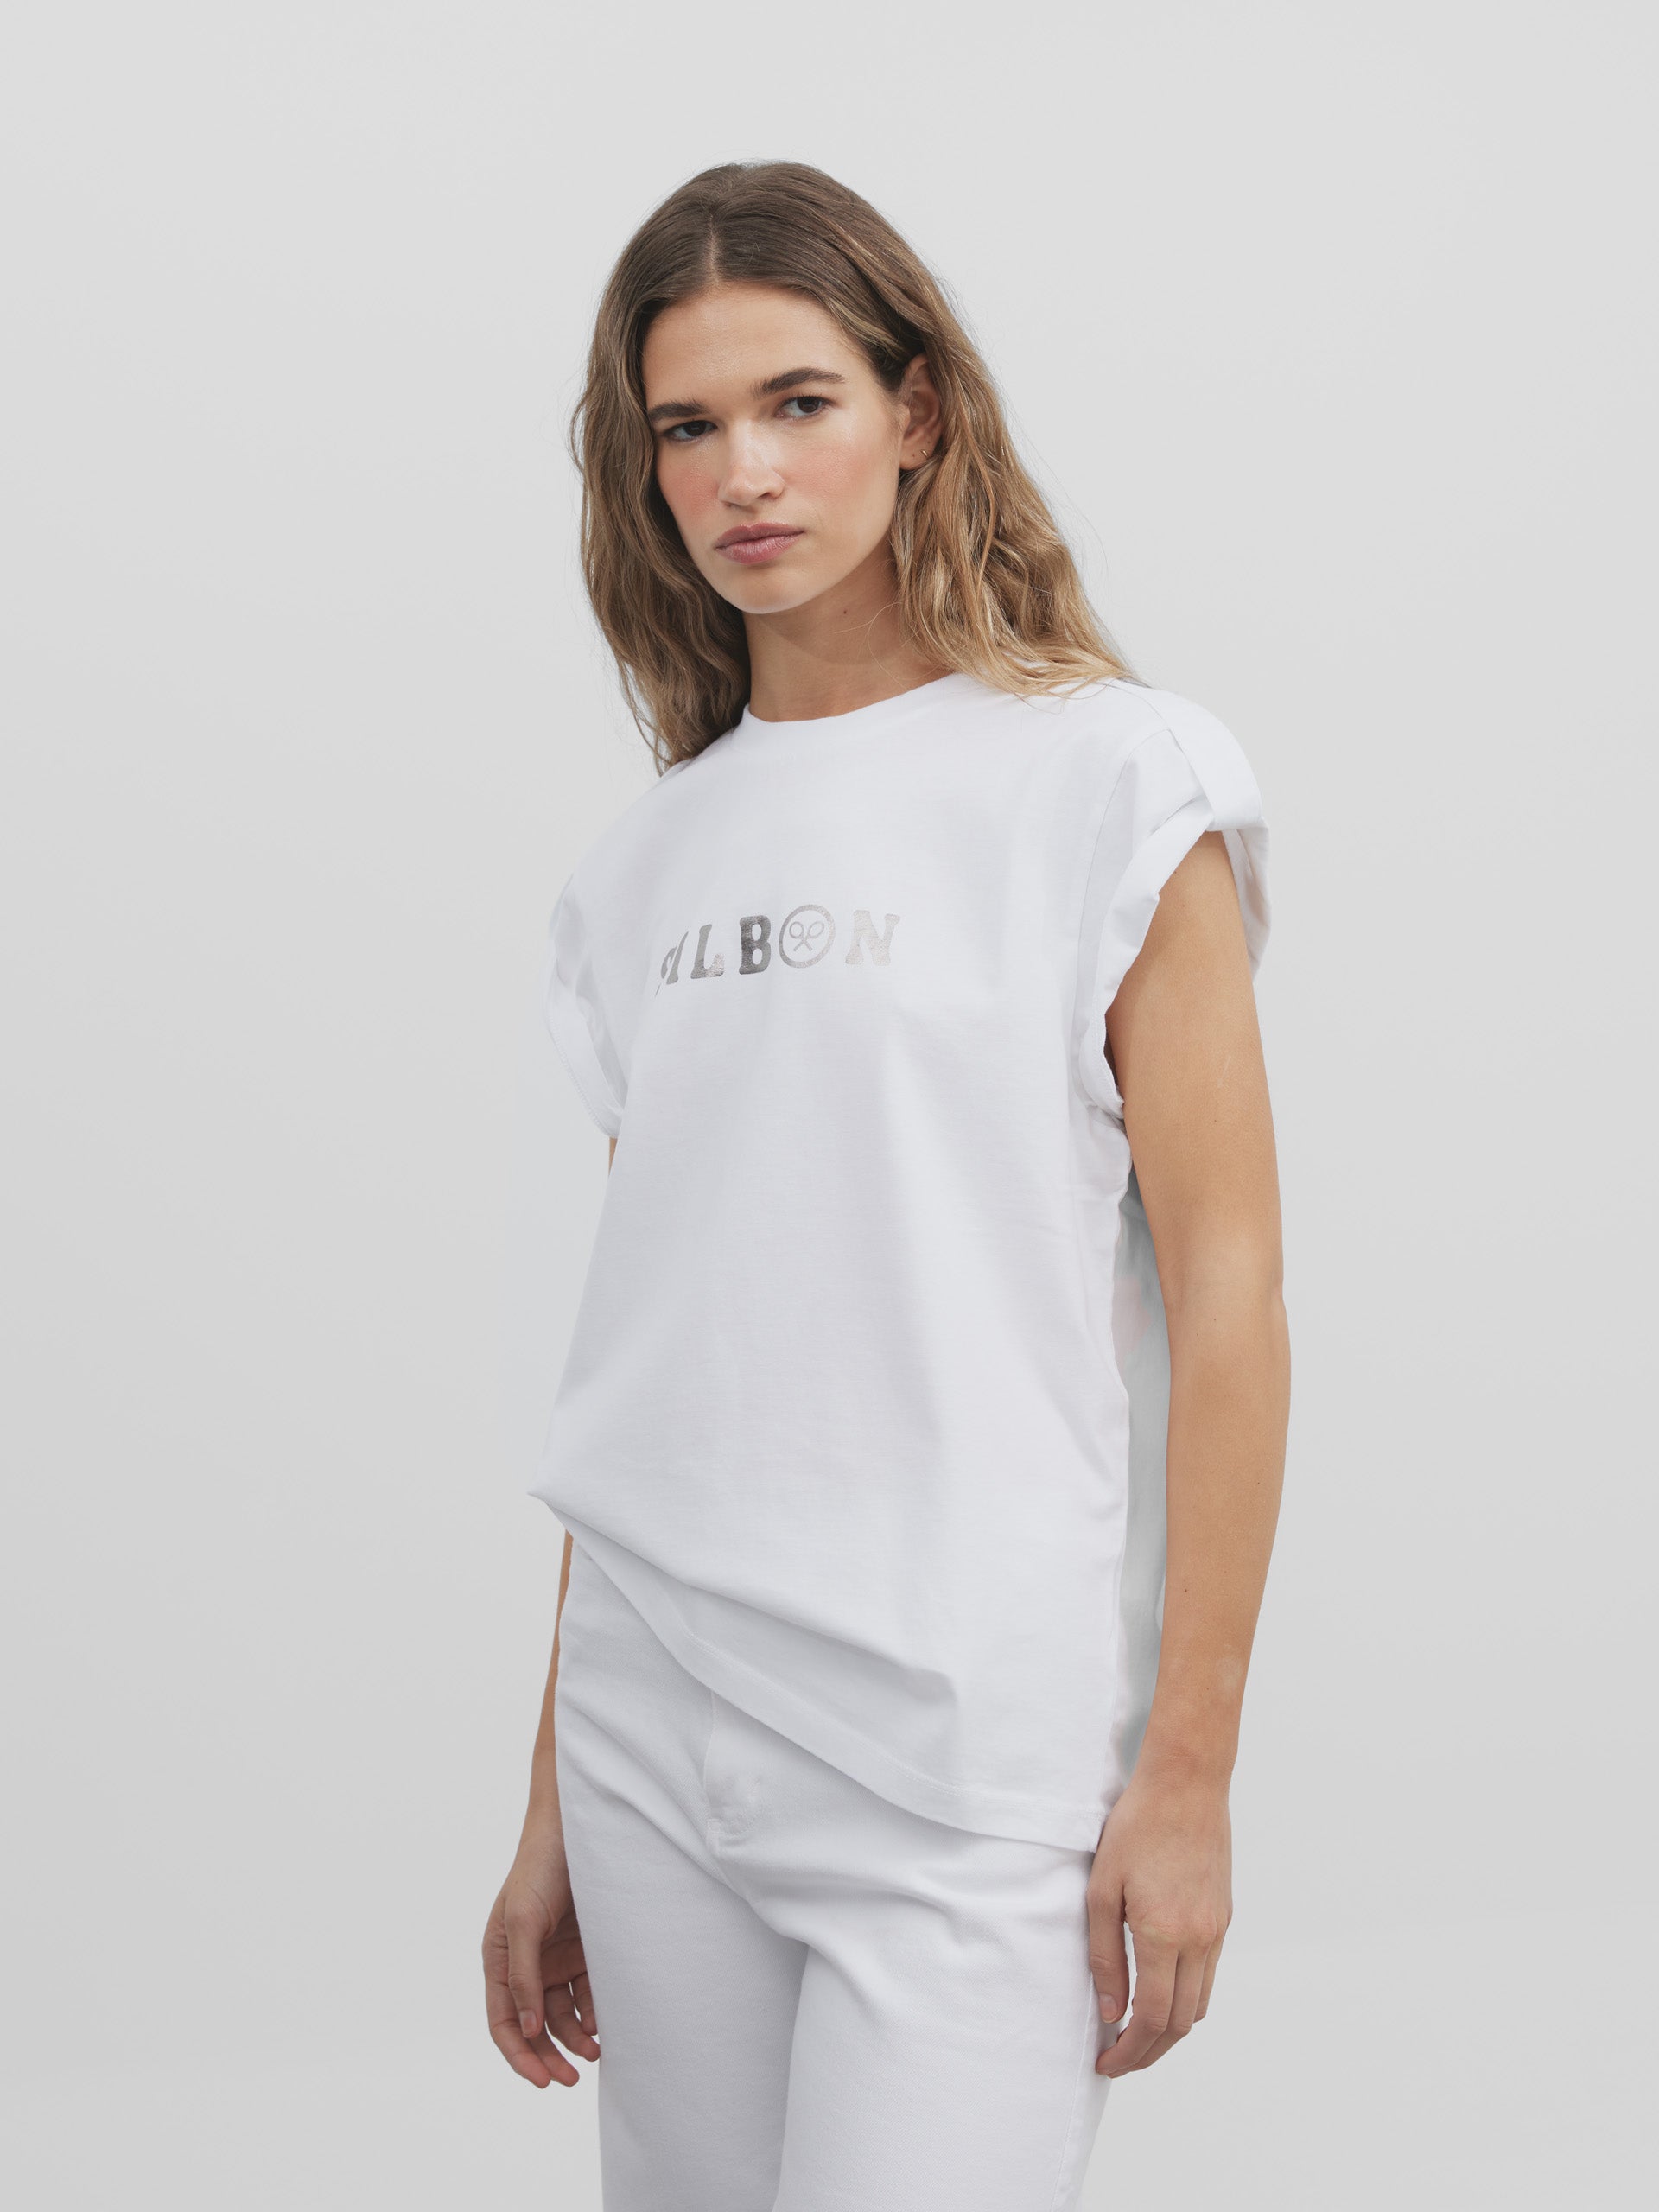 Women's silver roll out sleeve t-shirt